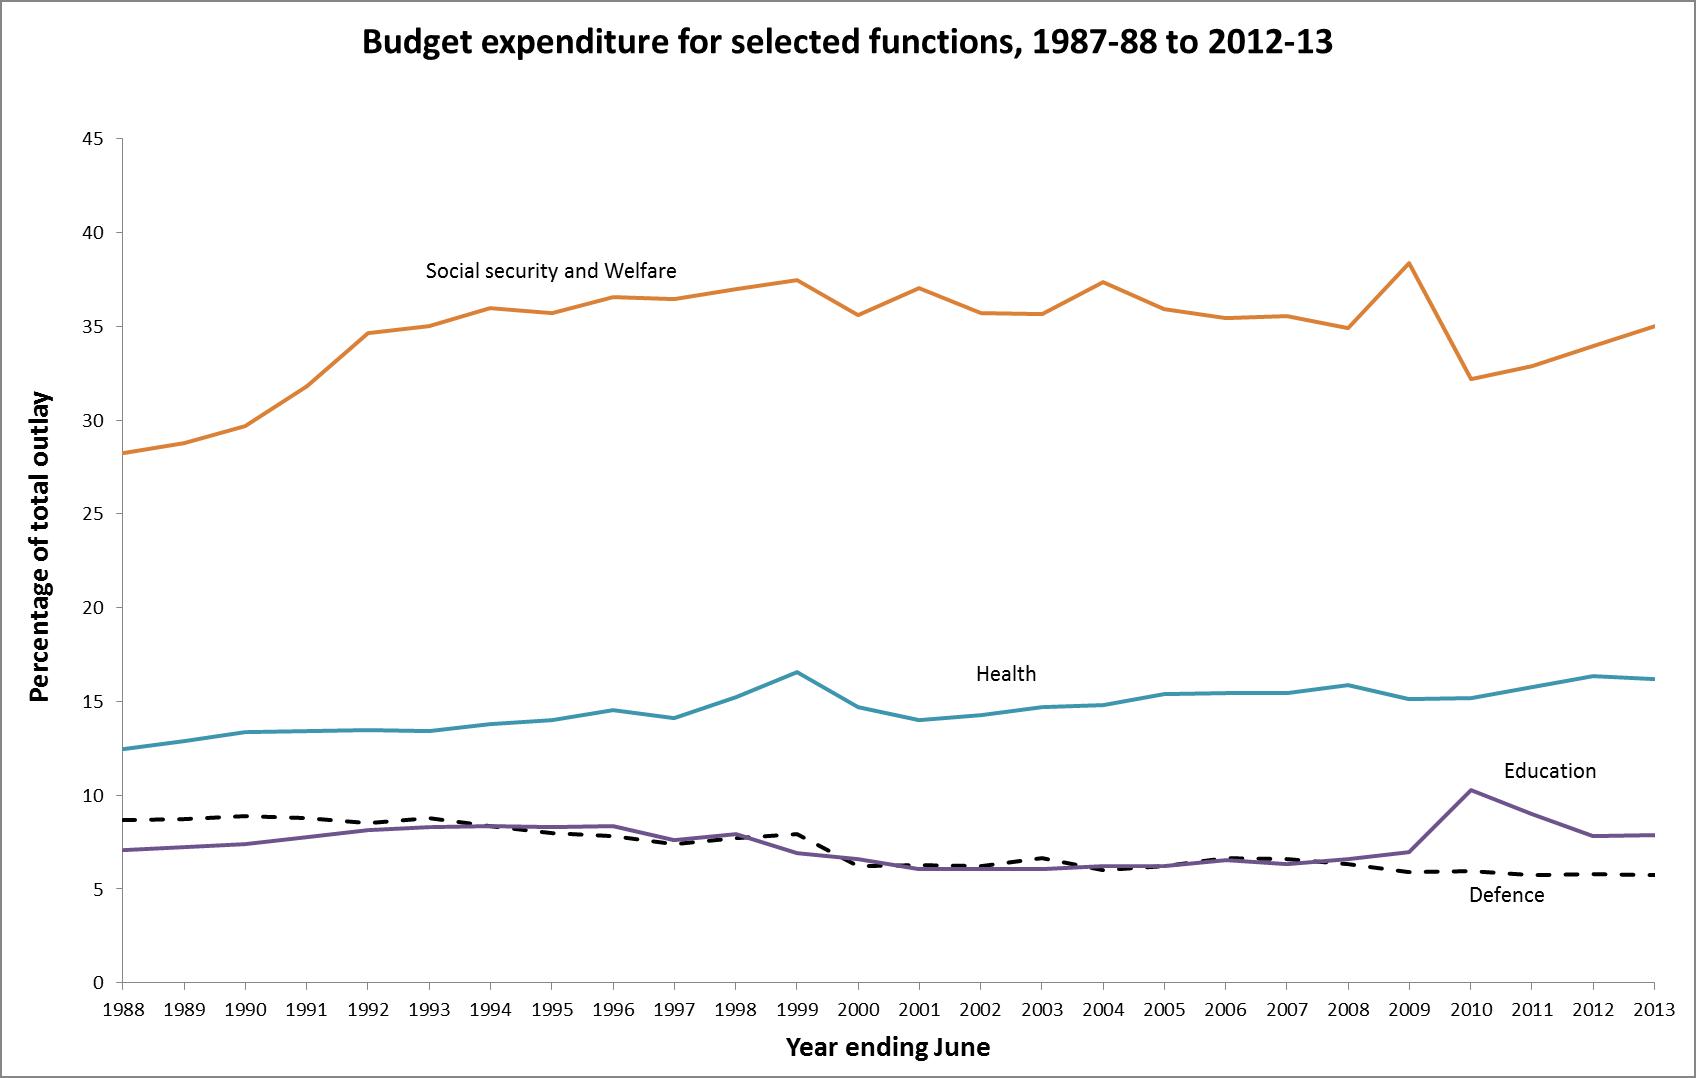 Graph 3: Budget expenditure for selected functions as a percentage of total outlays